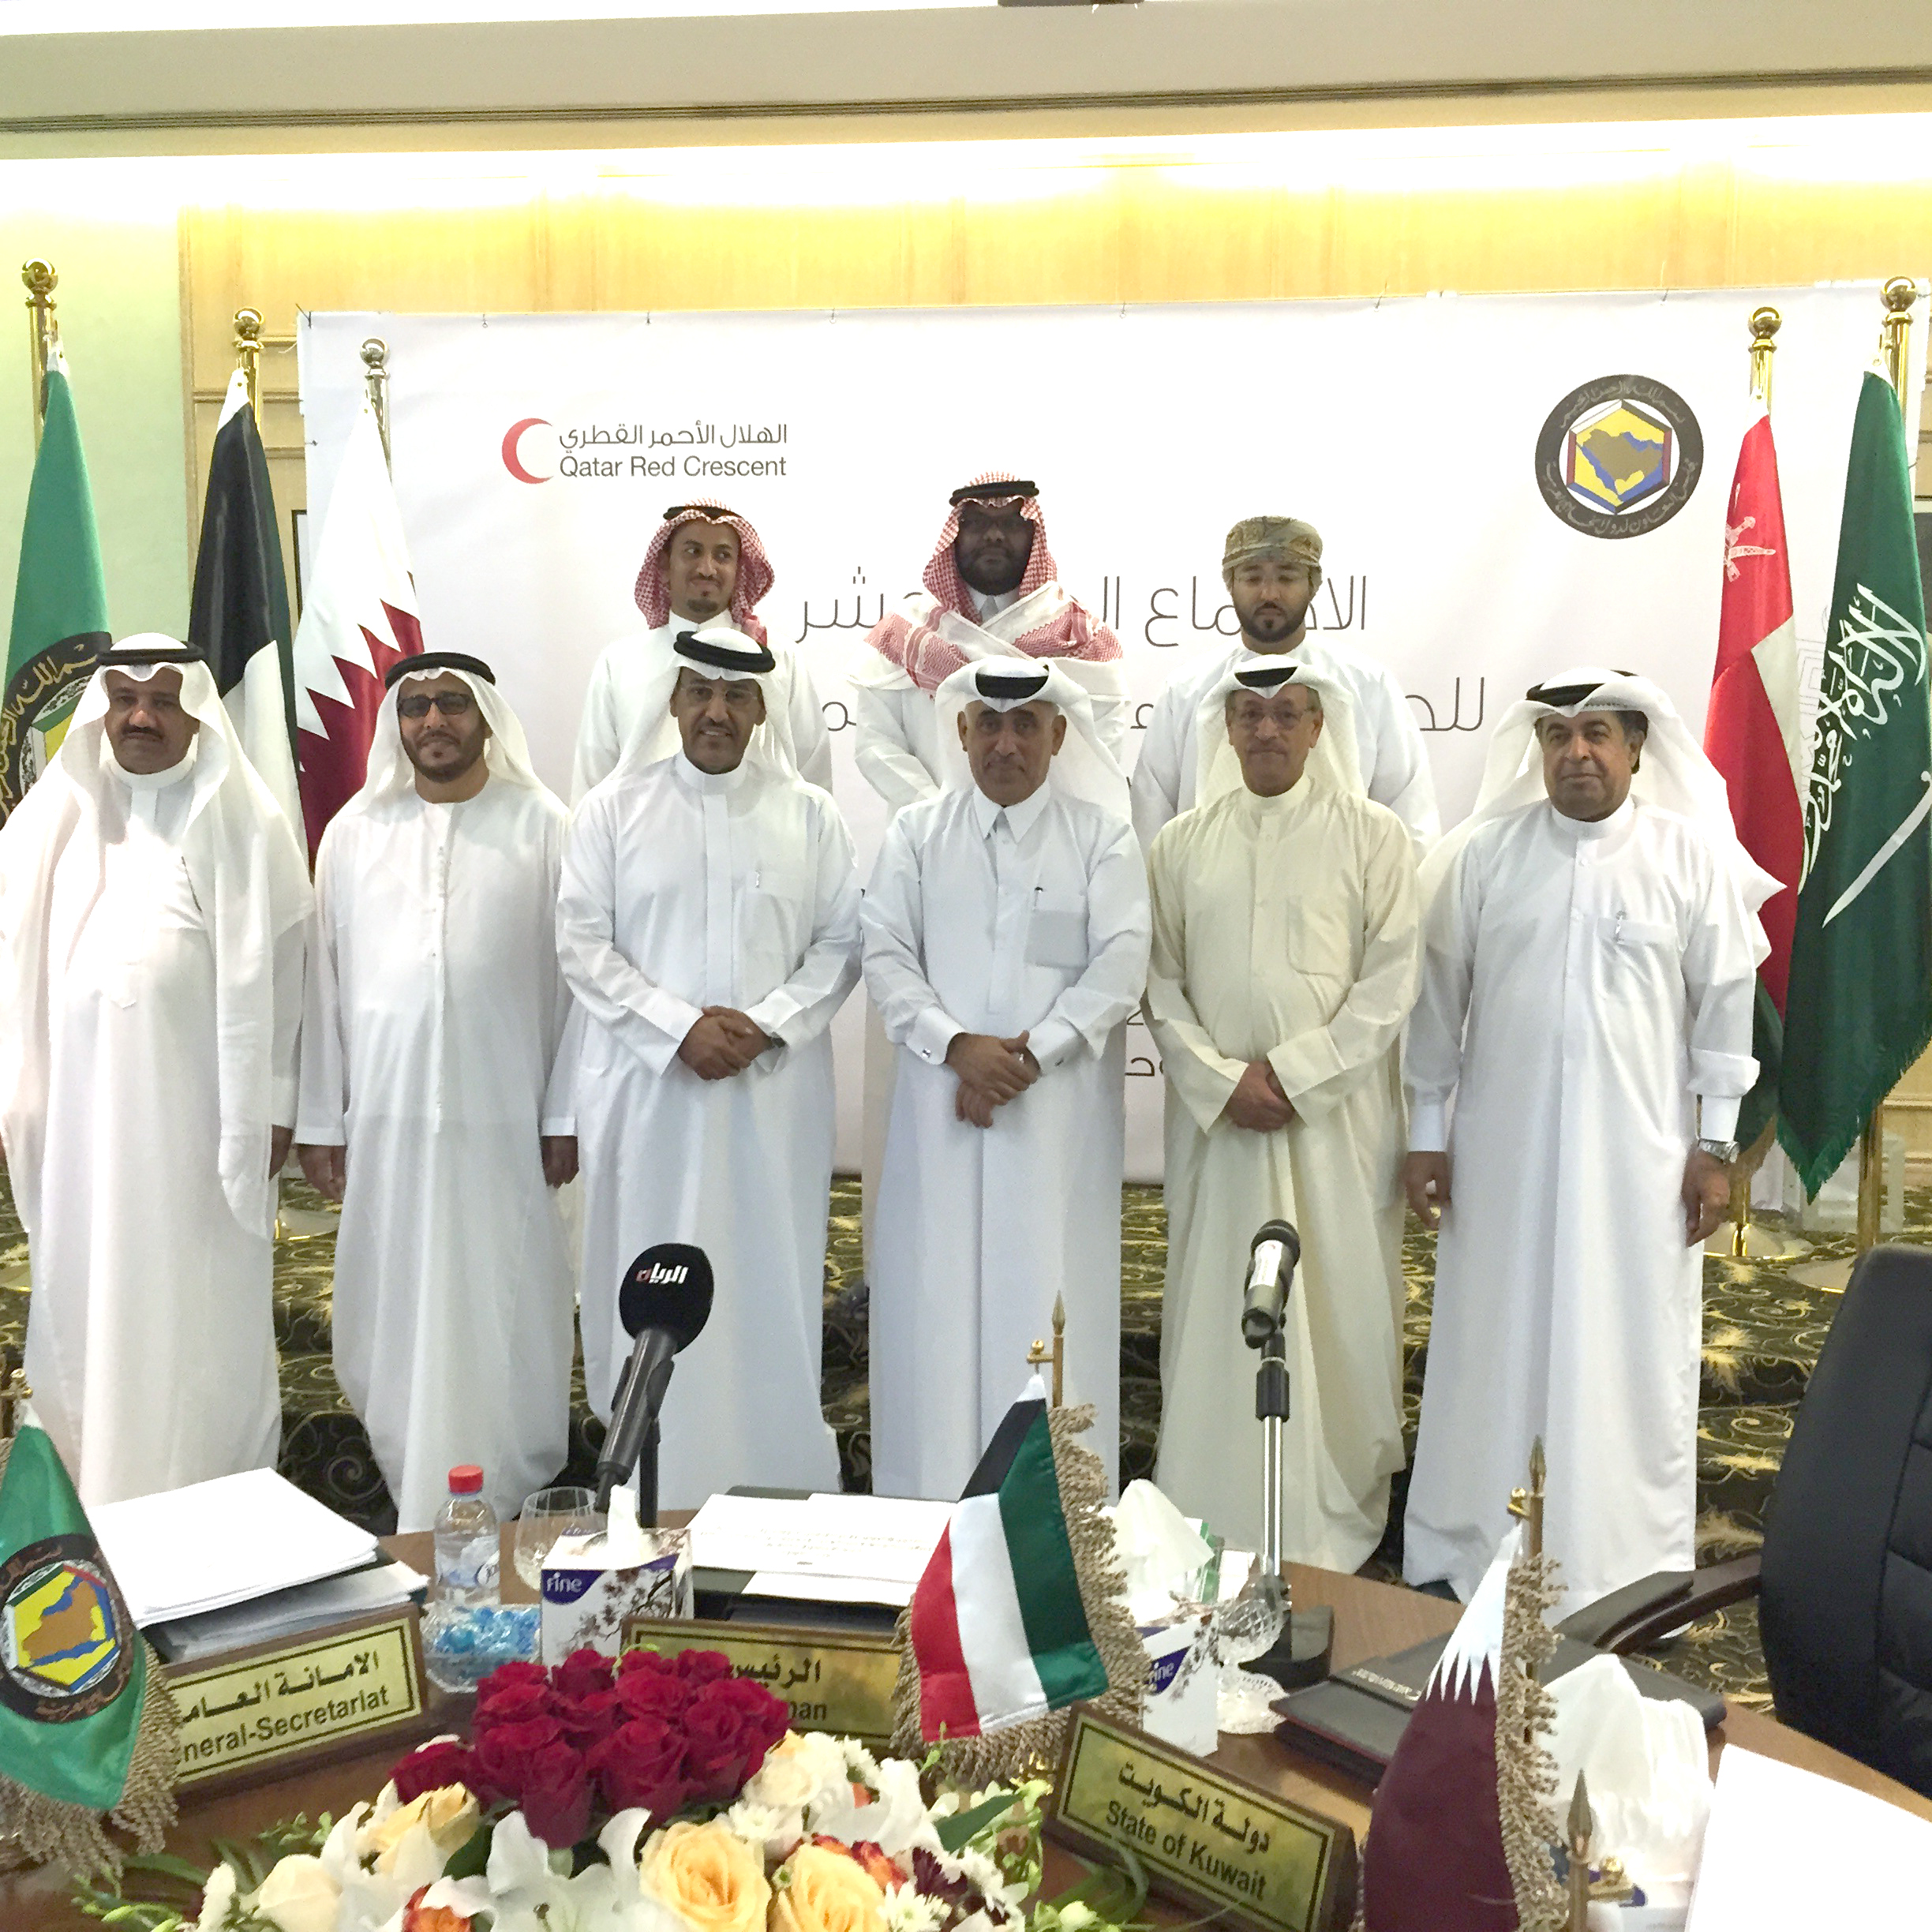 The 11th meeting of Chiefs of Gulf Cooperation Council (GCC) Red Crescent Societies